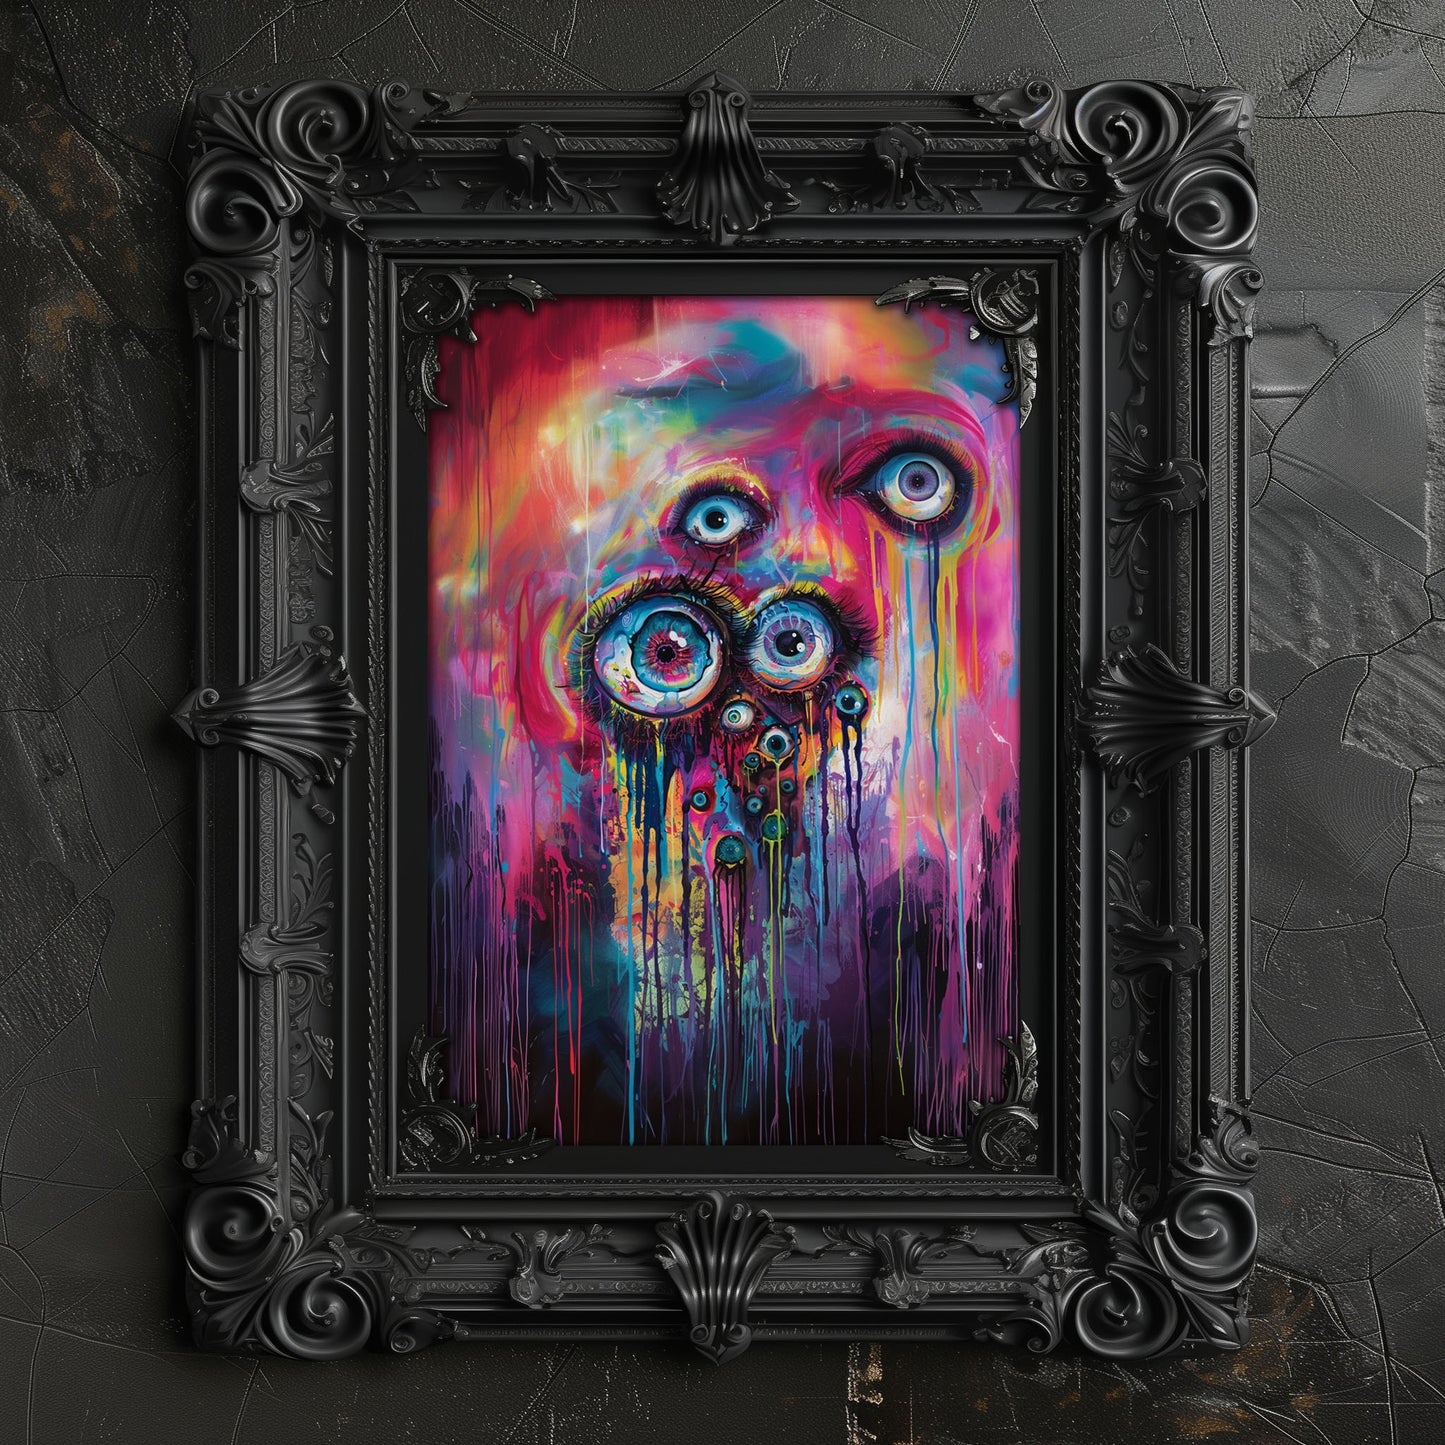 Surreal Eyes Painting - Colorful Weirdcore Wall Art for Home Decor